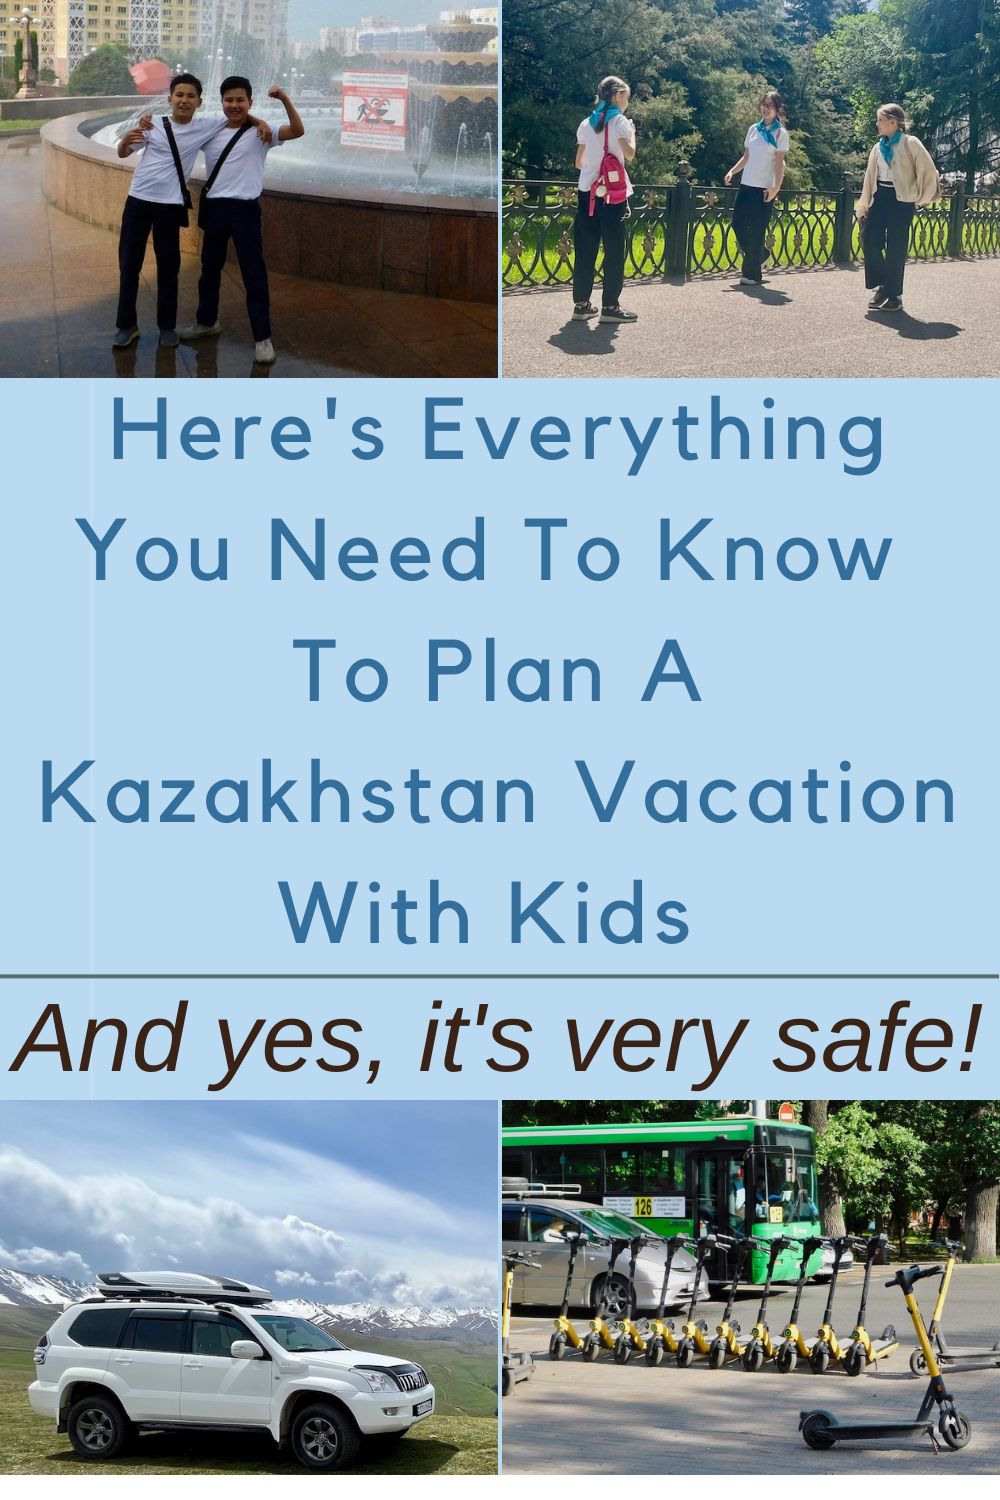 here is everything you need to know to travel to kazakhstan and its main city of almaty with kids. this central asian country is modern, clean, fun and yes, very safe!